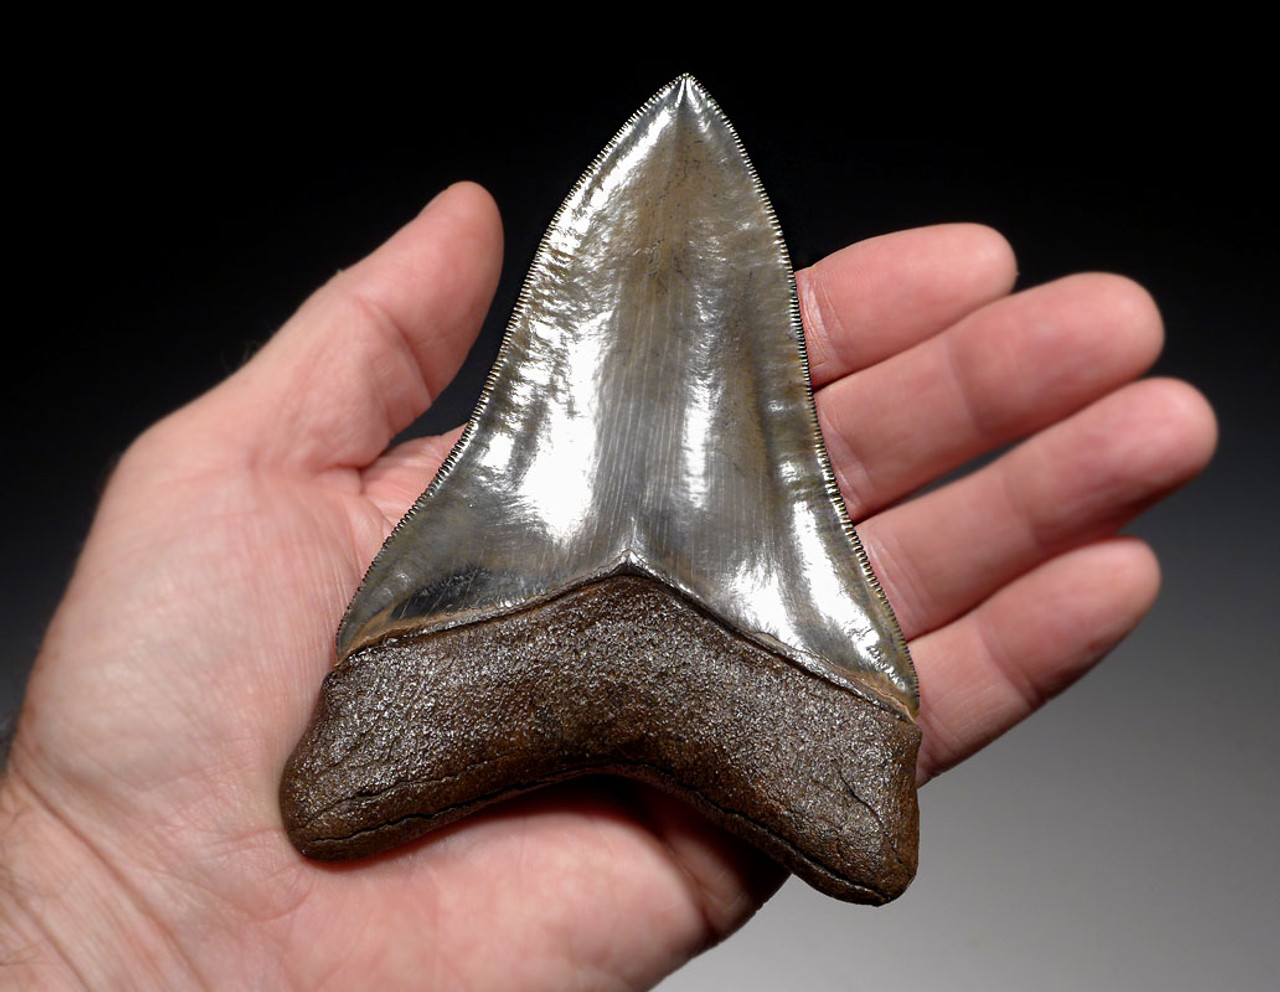 SH6-405 - INVESTMENT GRADE 5 INCH MEGALODON SHARK TOOTH WITH RARE OPEN SPOTTED GOLD AND GRAY ENAMEL